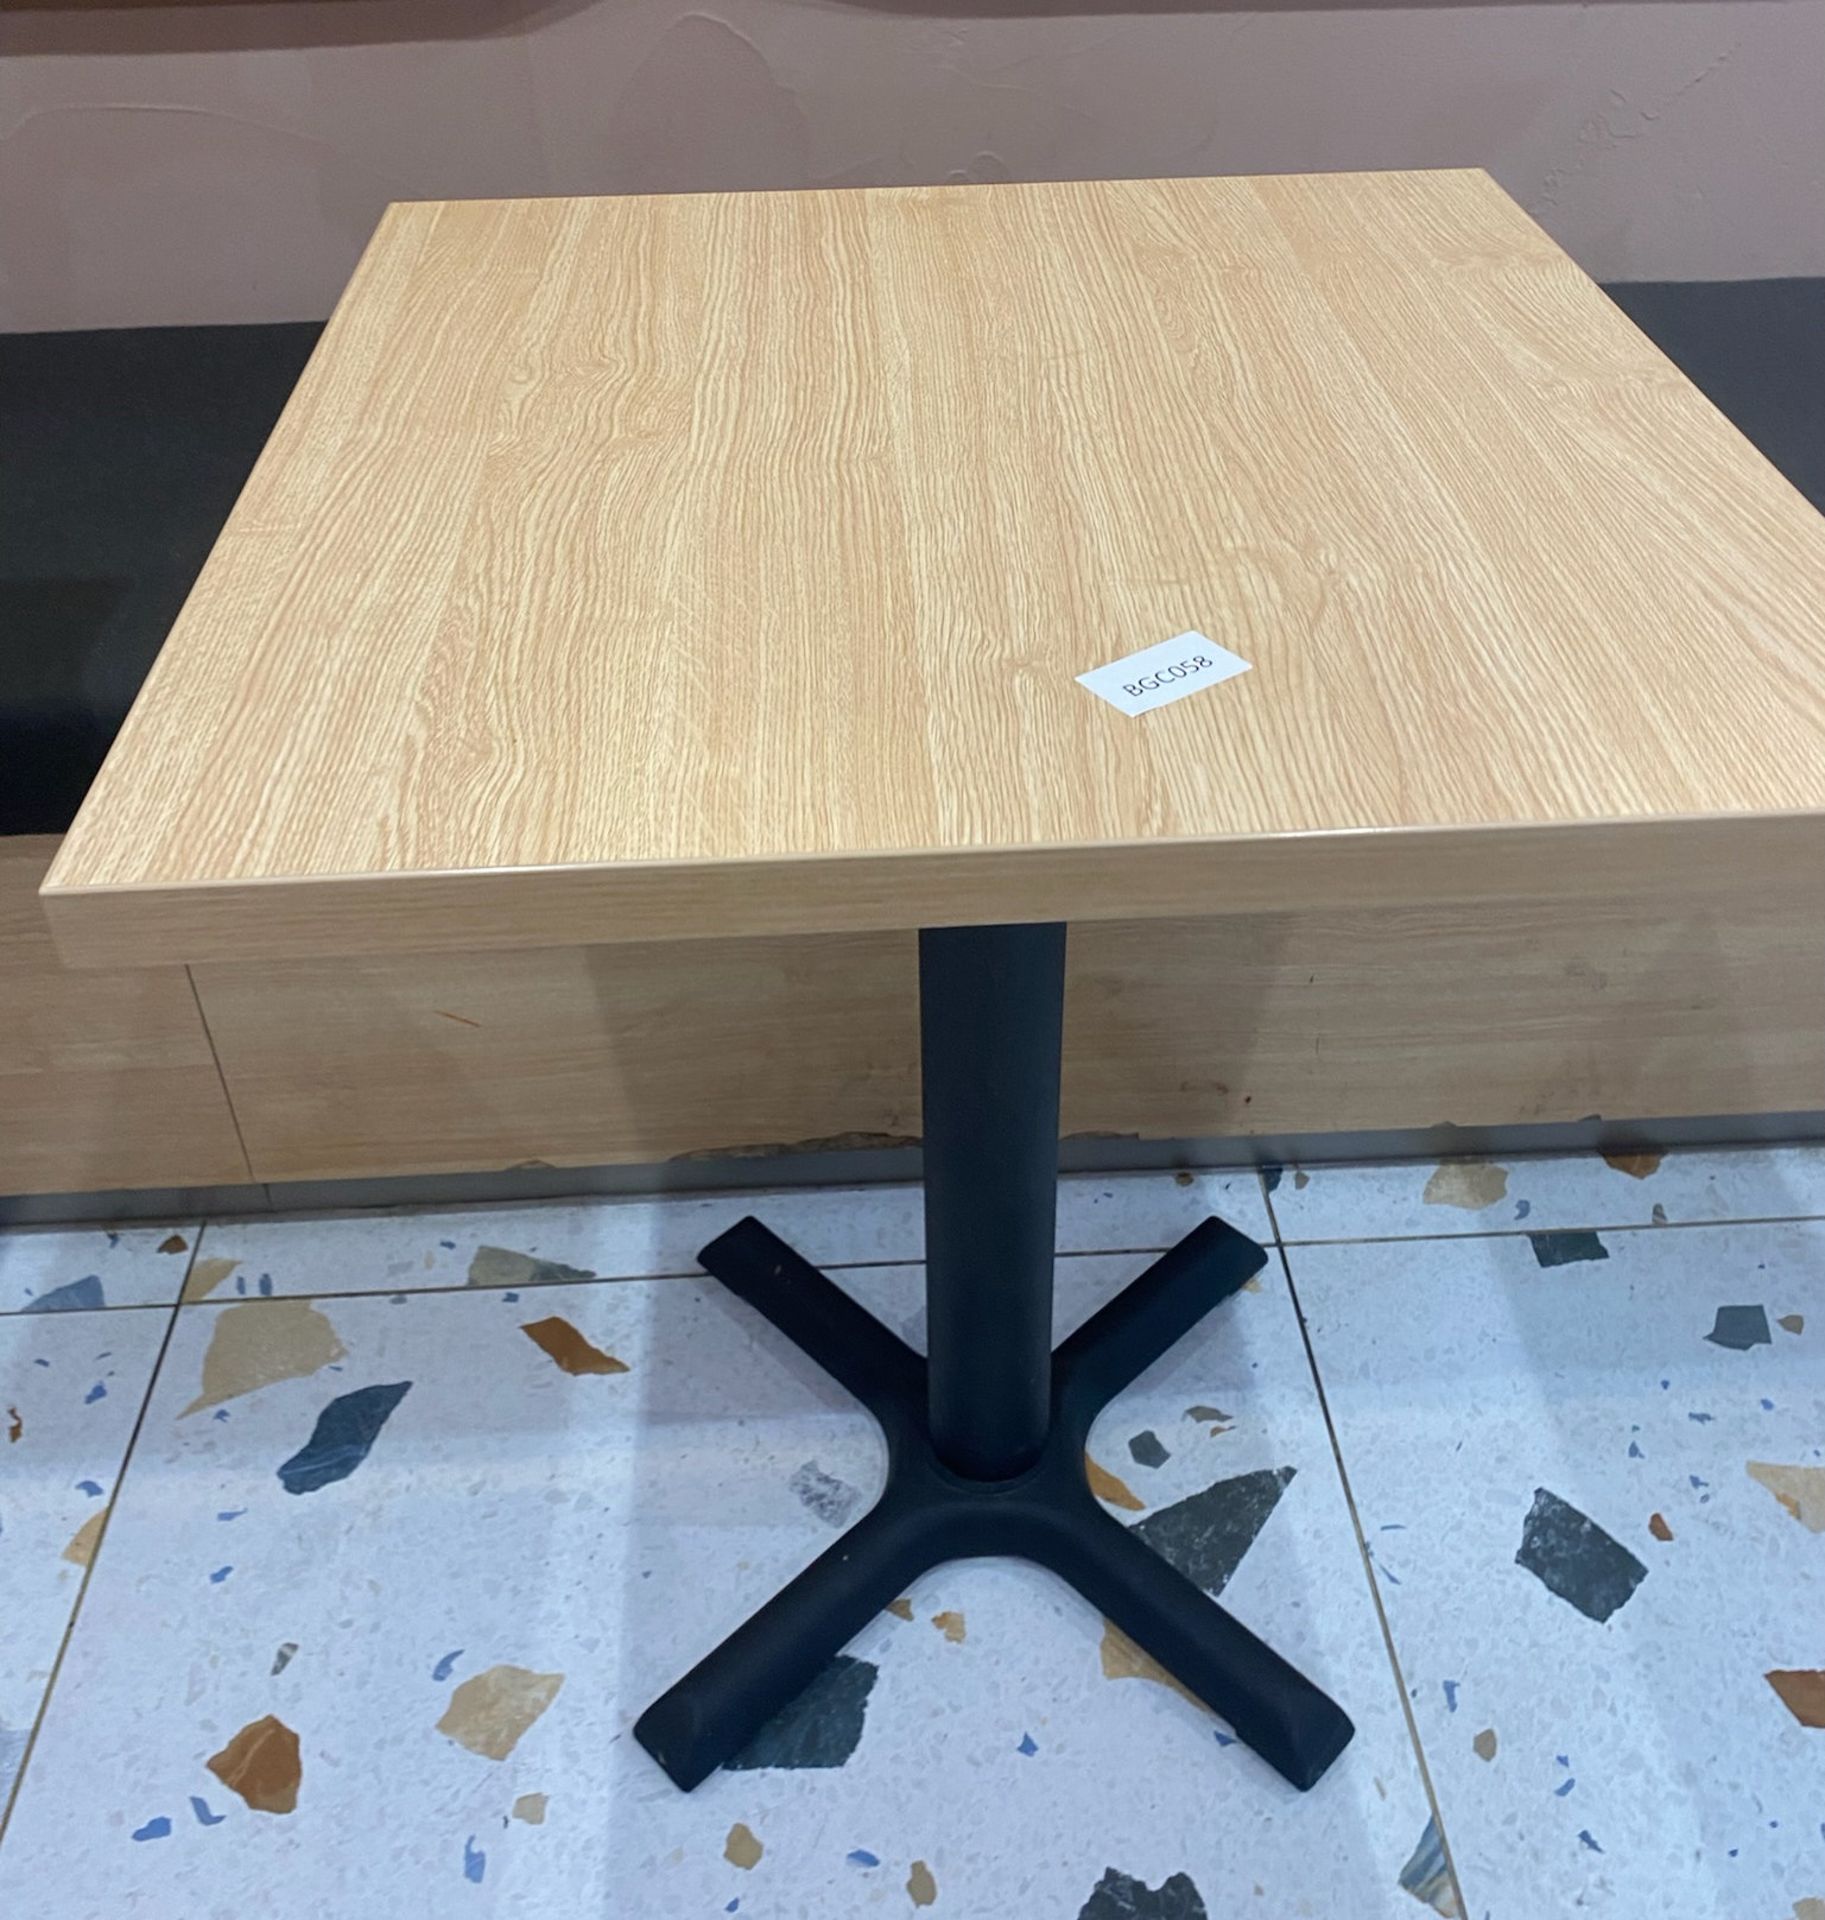 1 x Light Maple Coloured Wooden Top Square Dining Table With Metal Leg - Approx. 600Mm - Ref: BGC059